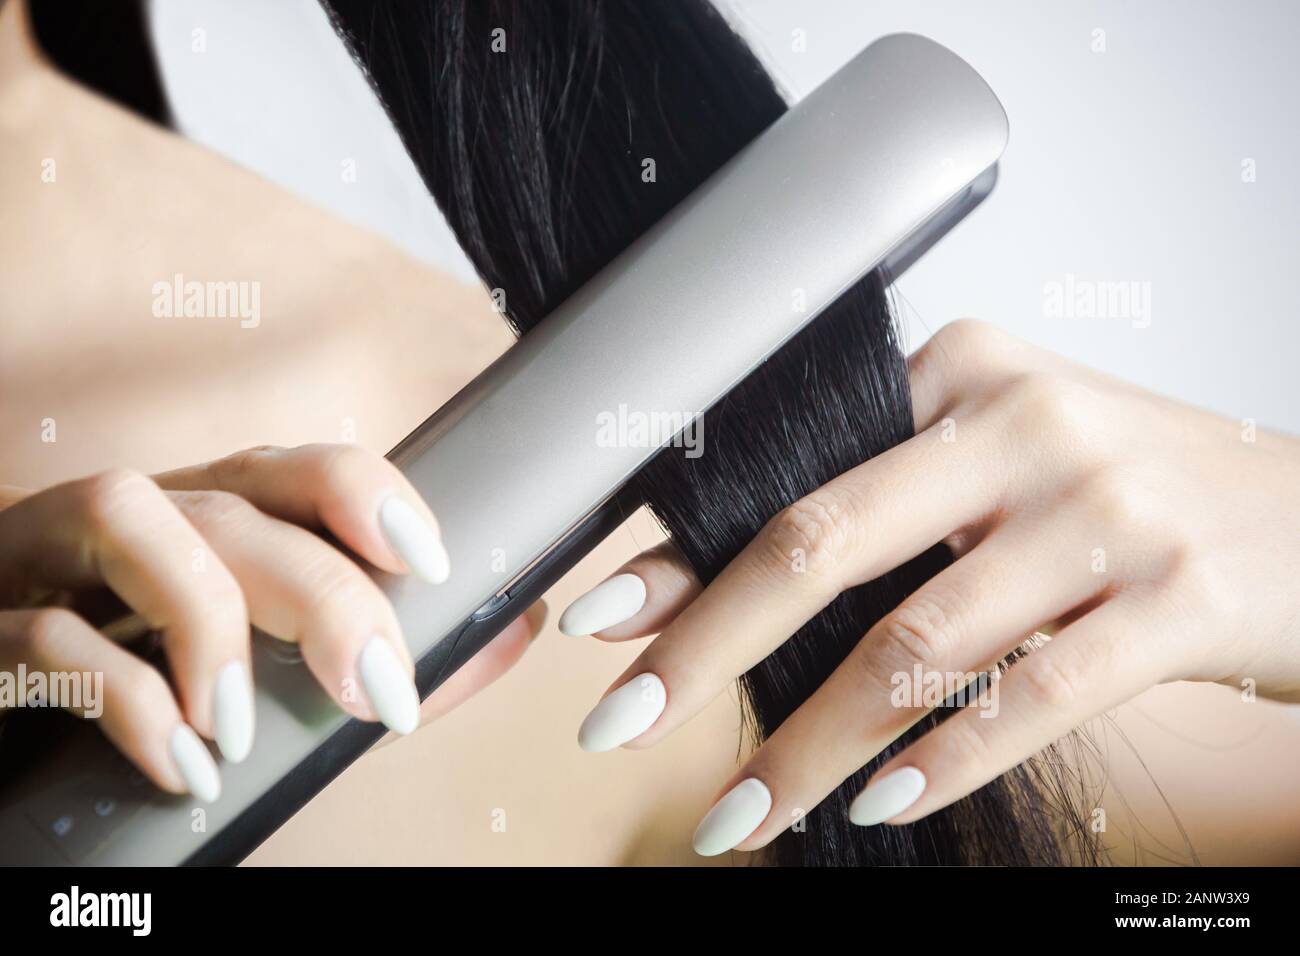 woman straightening her hair with hair iron Stock Photo